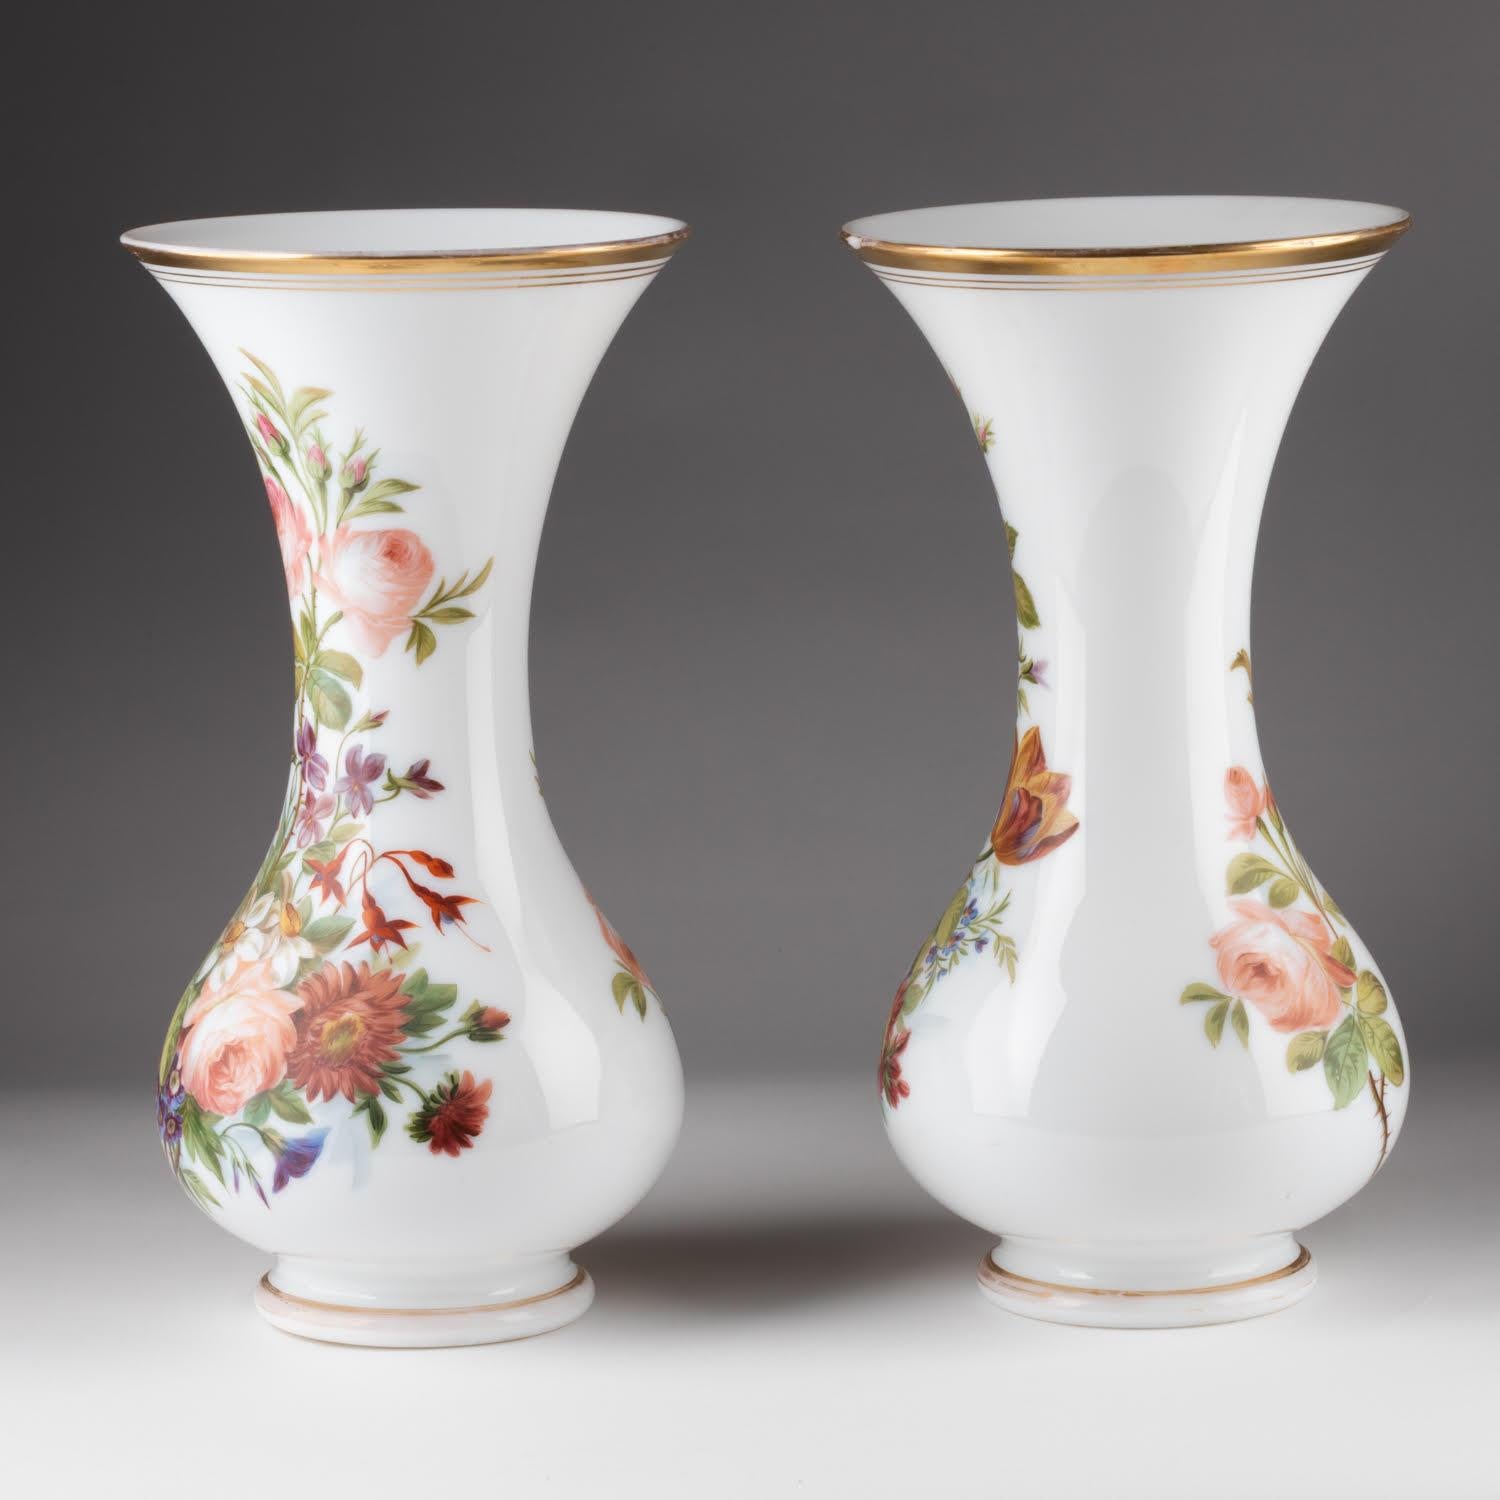 Pair of Opaline Vases Painted with Floral Motifs, 19th Century. For Sale 3